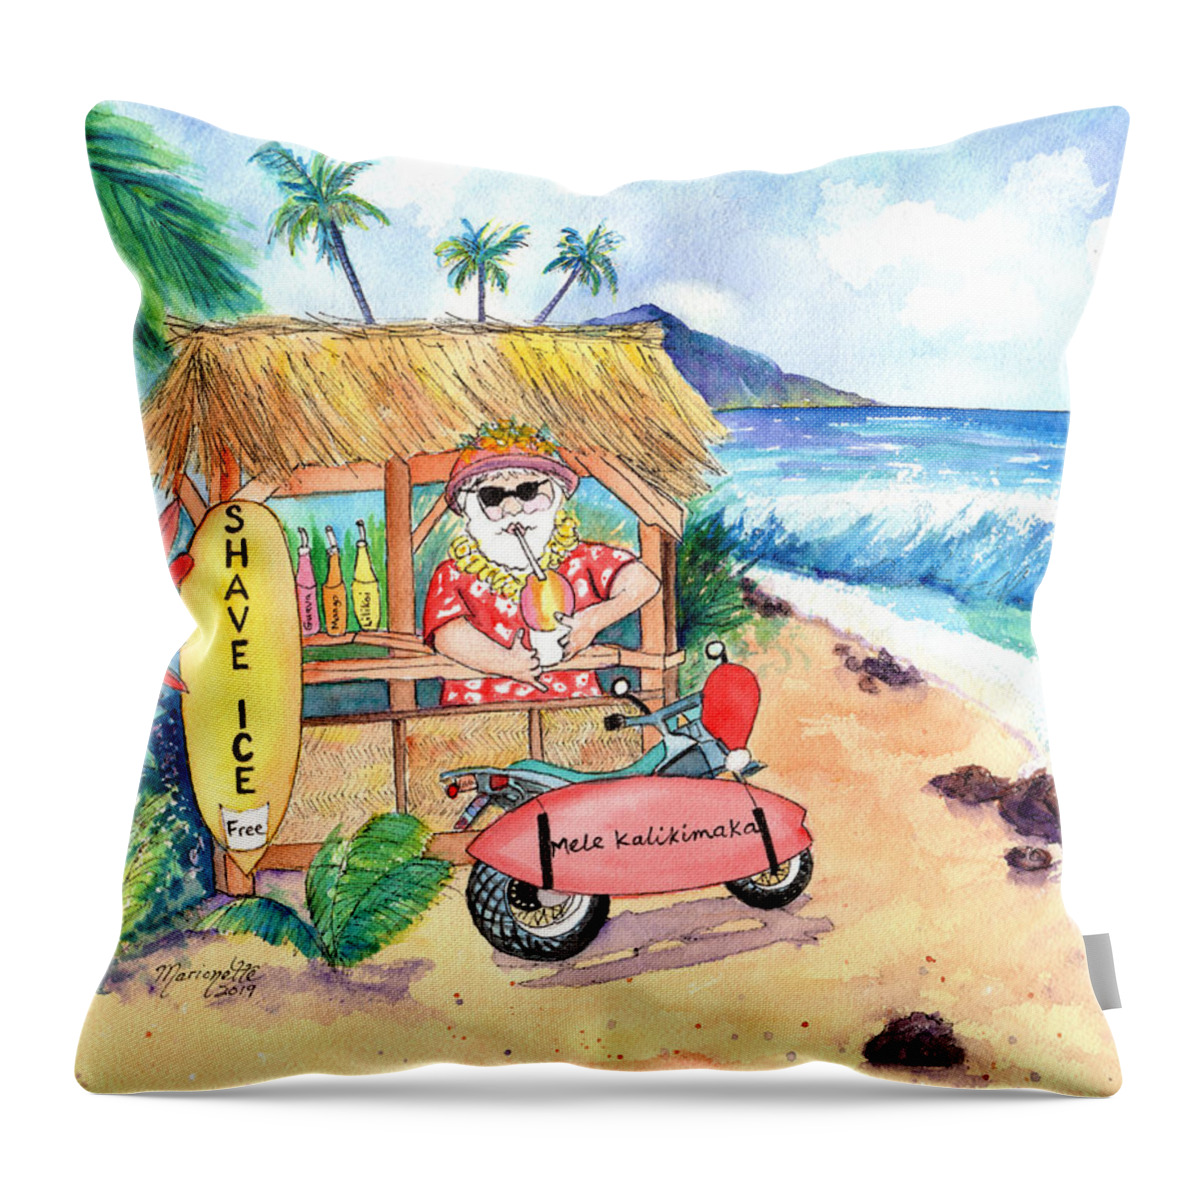 Santa Throw Pillow featuring the painting Shave Ice Santa by Marionette Taboniar